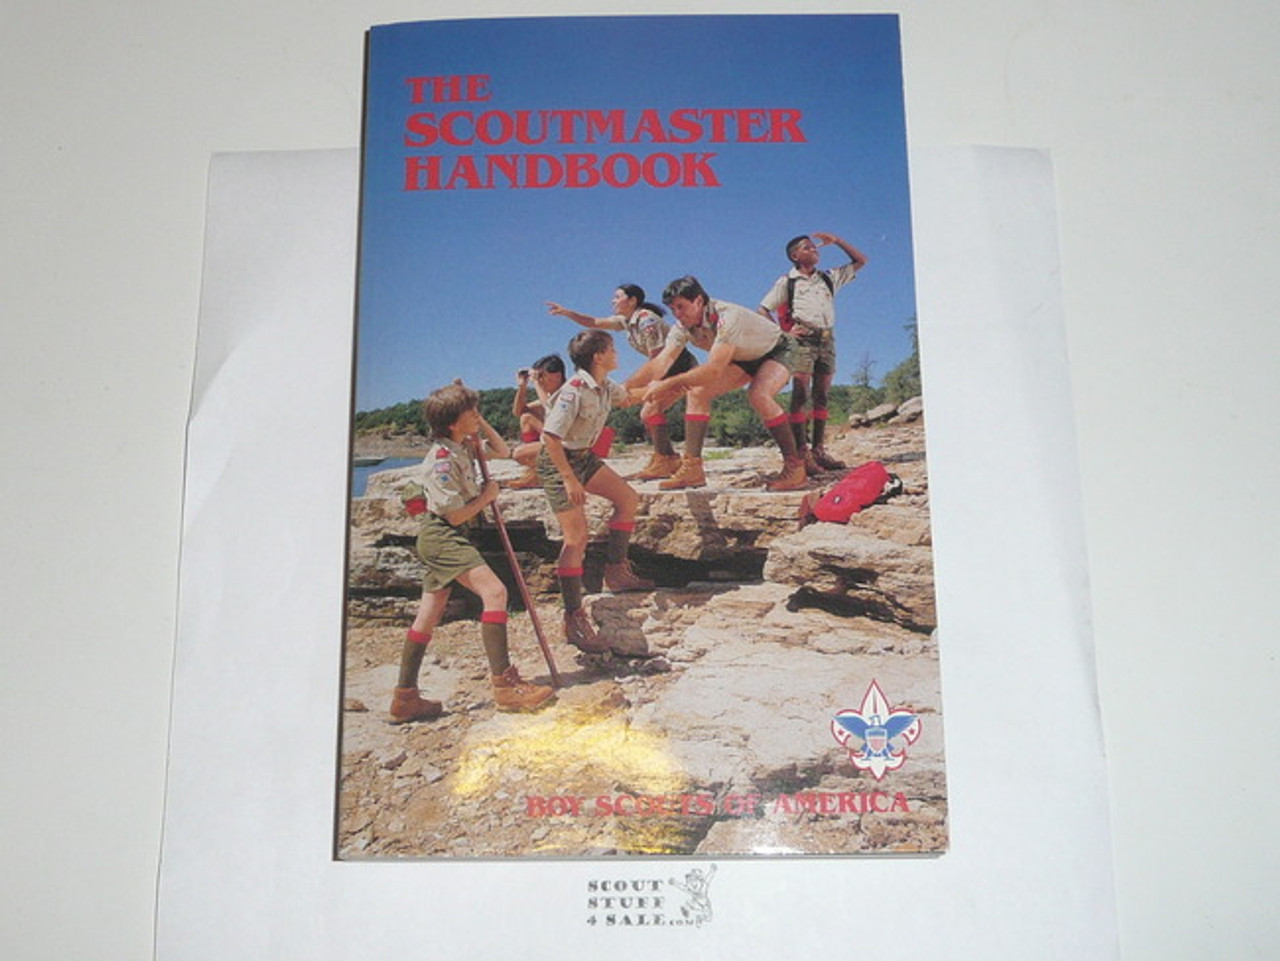 1990 Scoutmasters Handbook, Eighth Edition, First Printing, MINT Condition